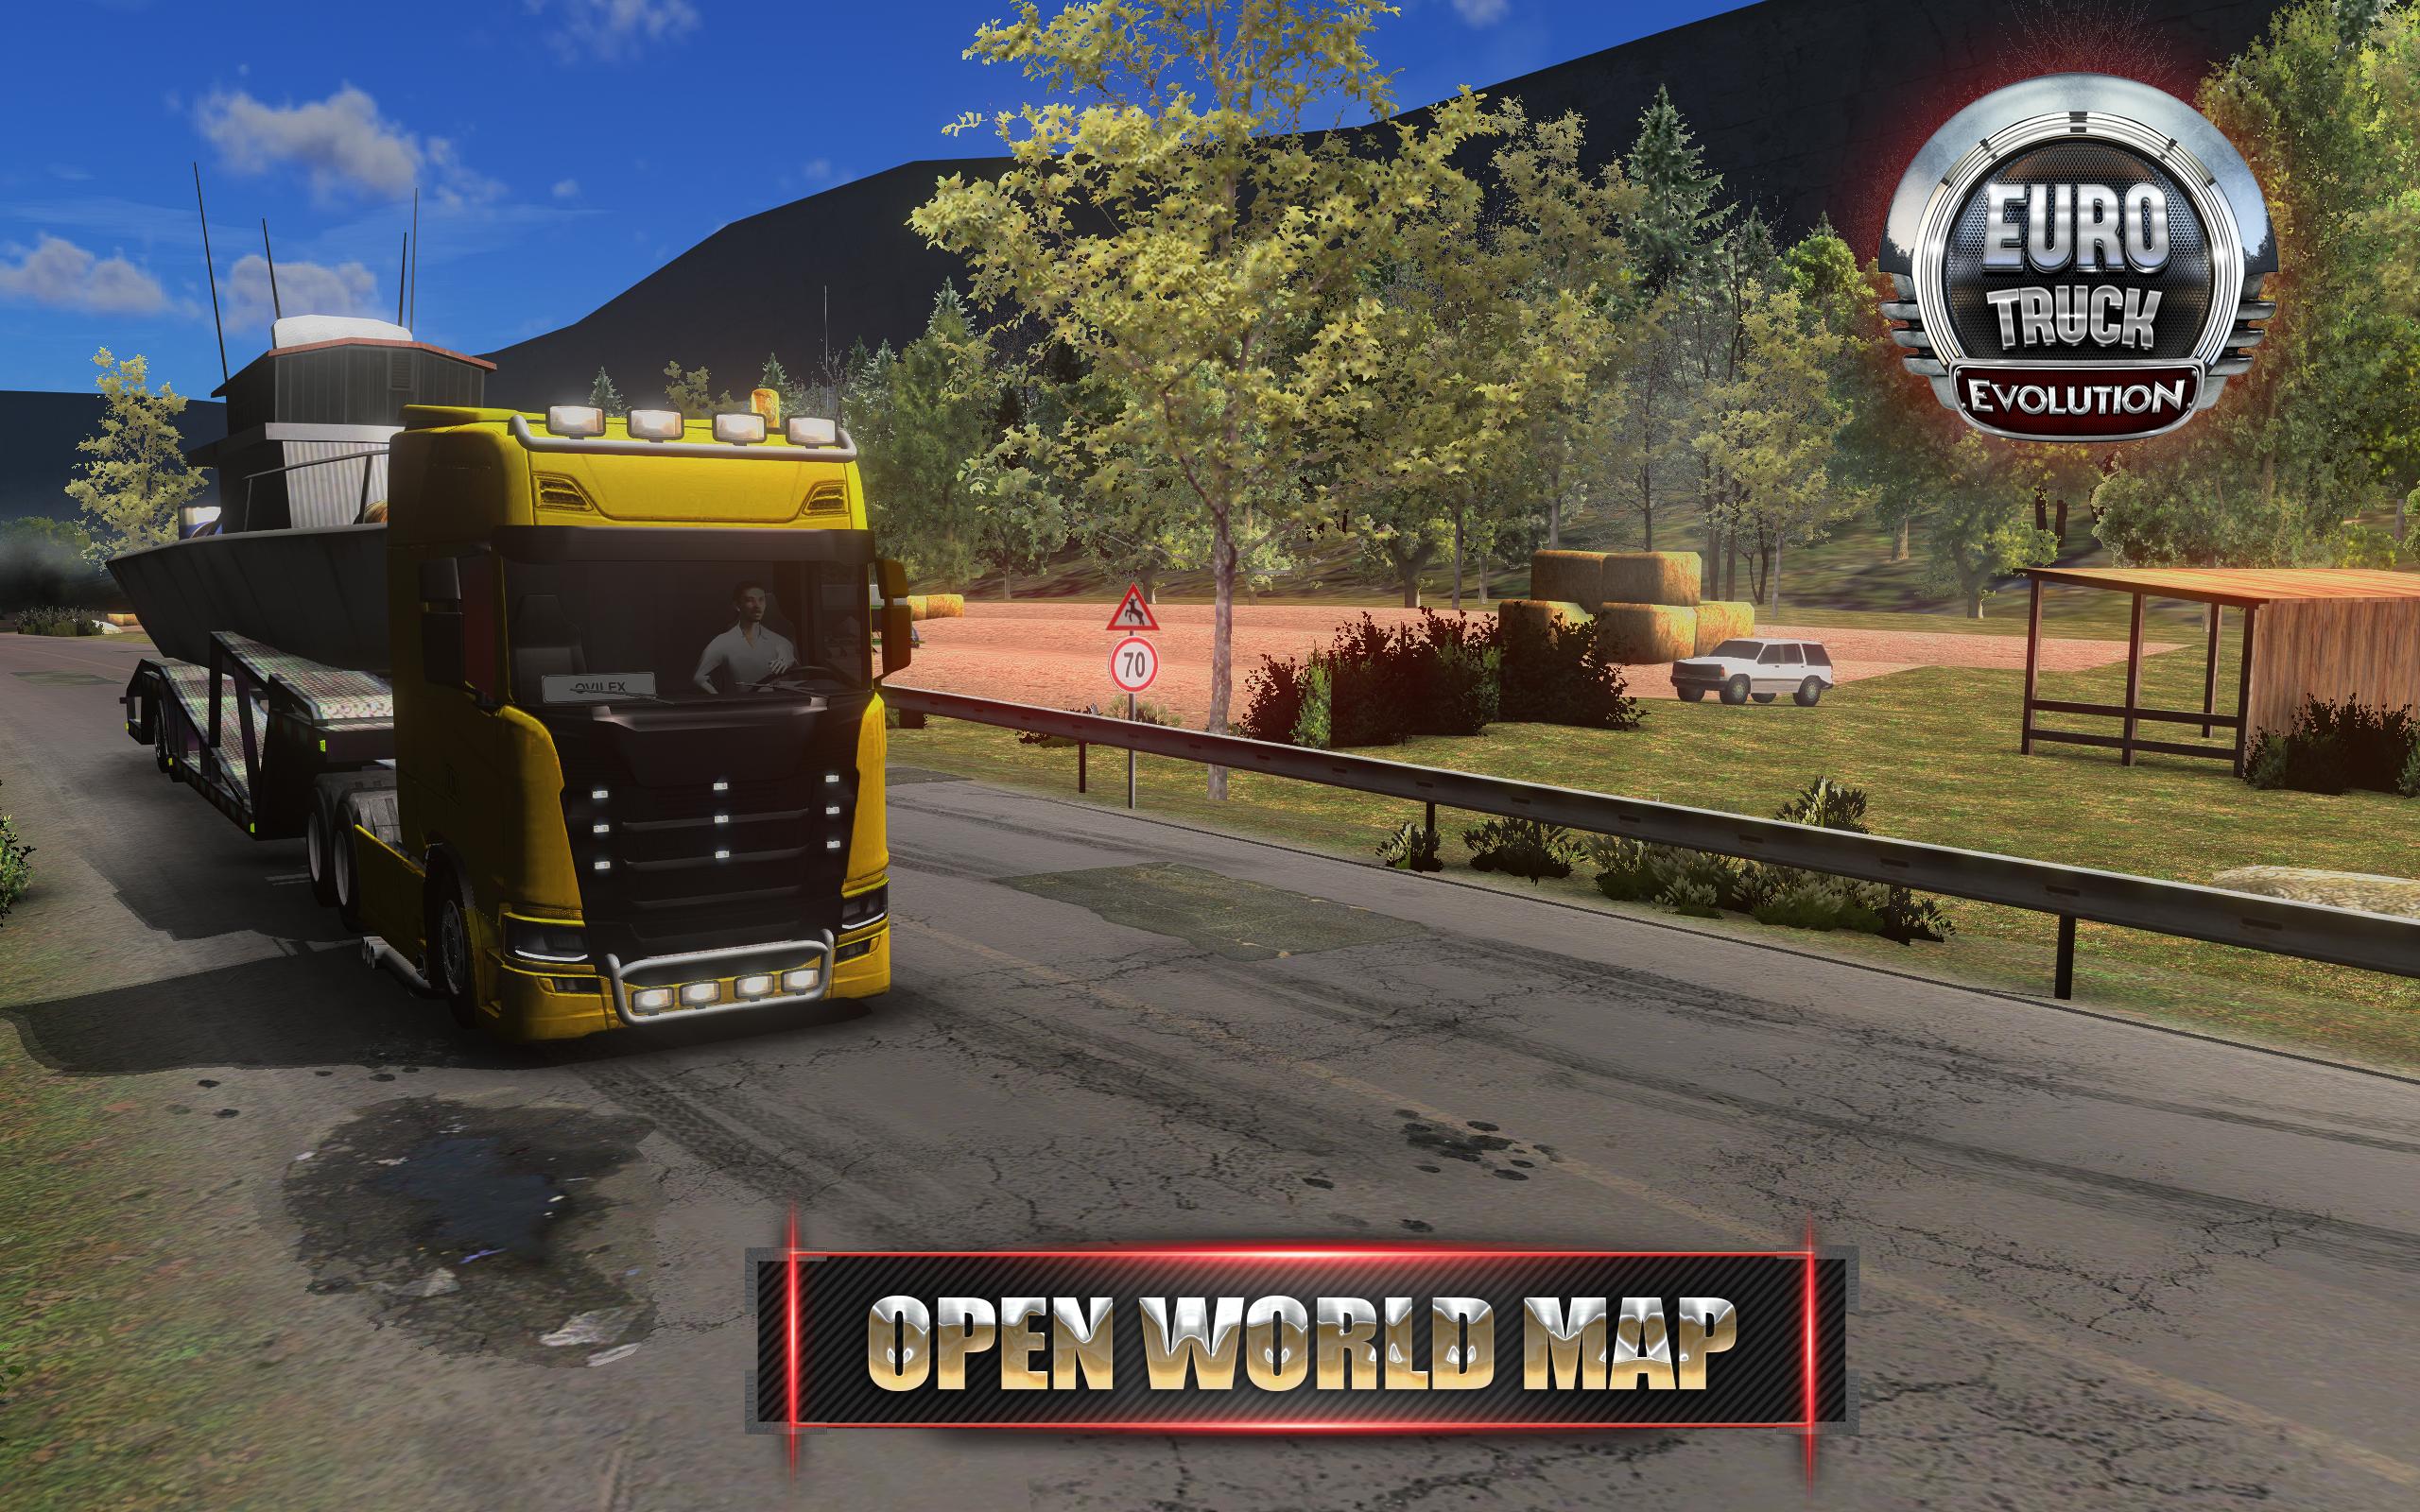 Euro Truck Evolution (Simulator) for Android APK Download